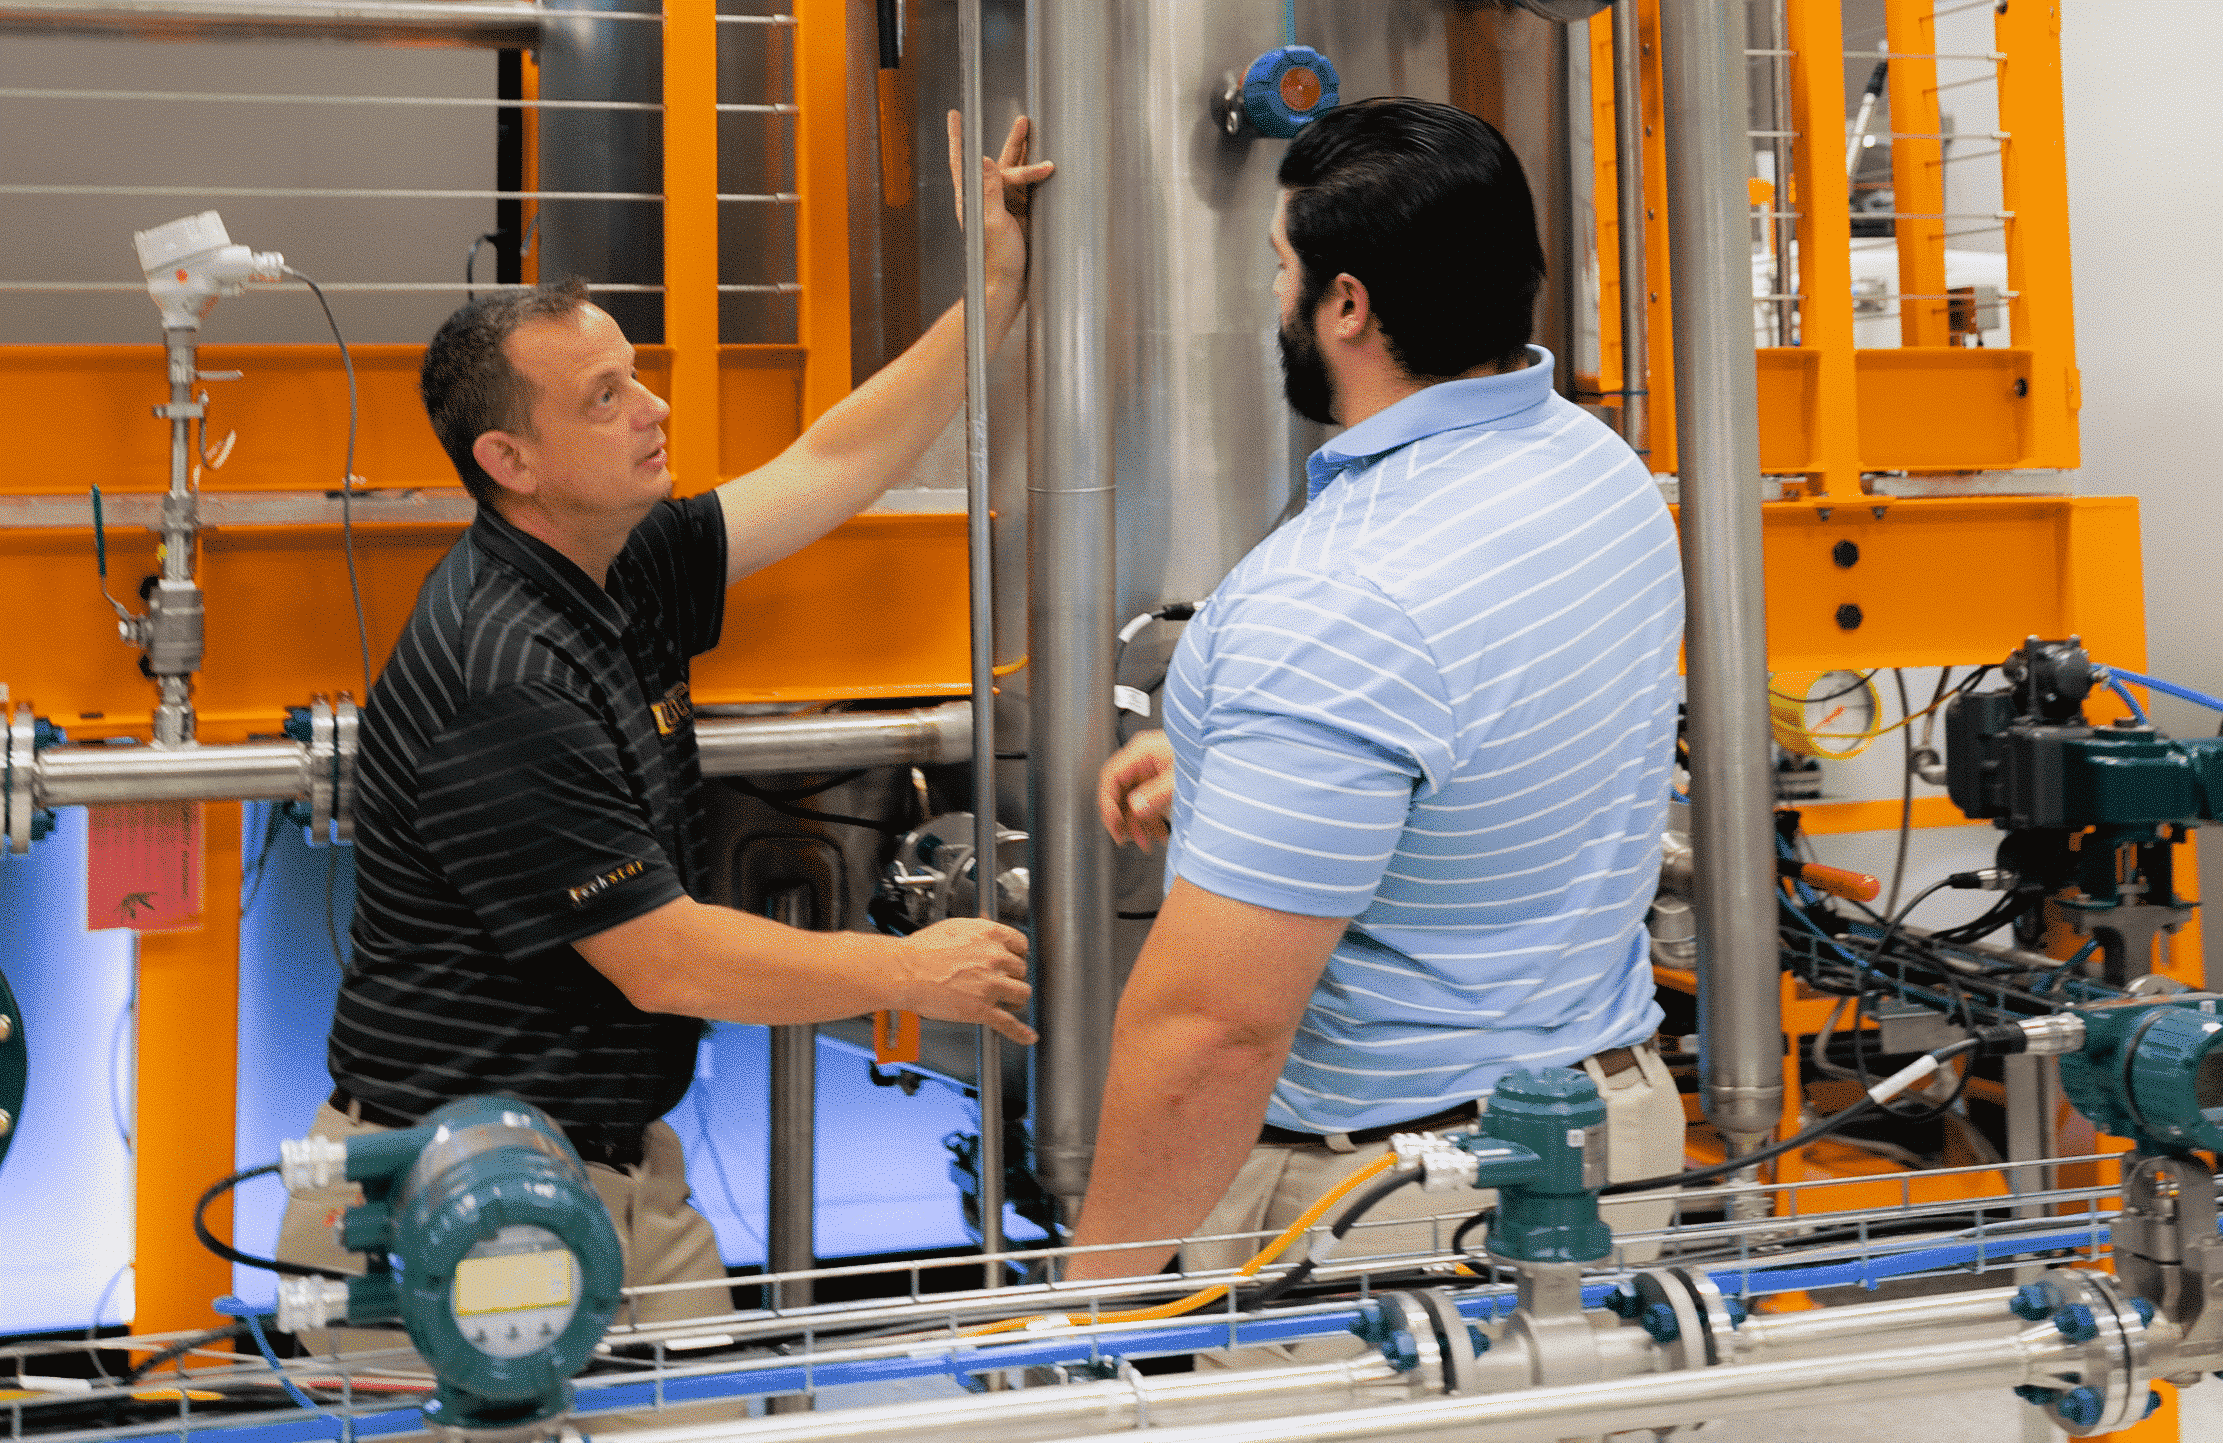 Two men are discussing and training on the use of various valves and measurement instrumentation